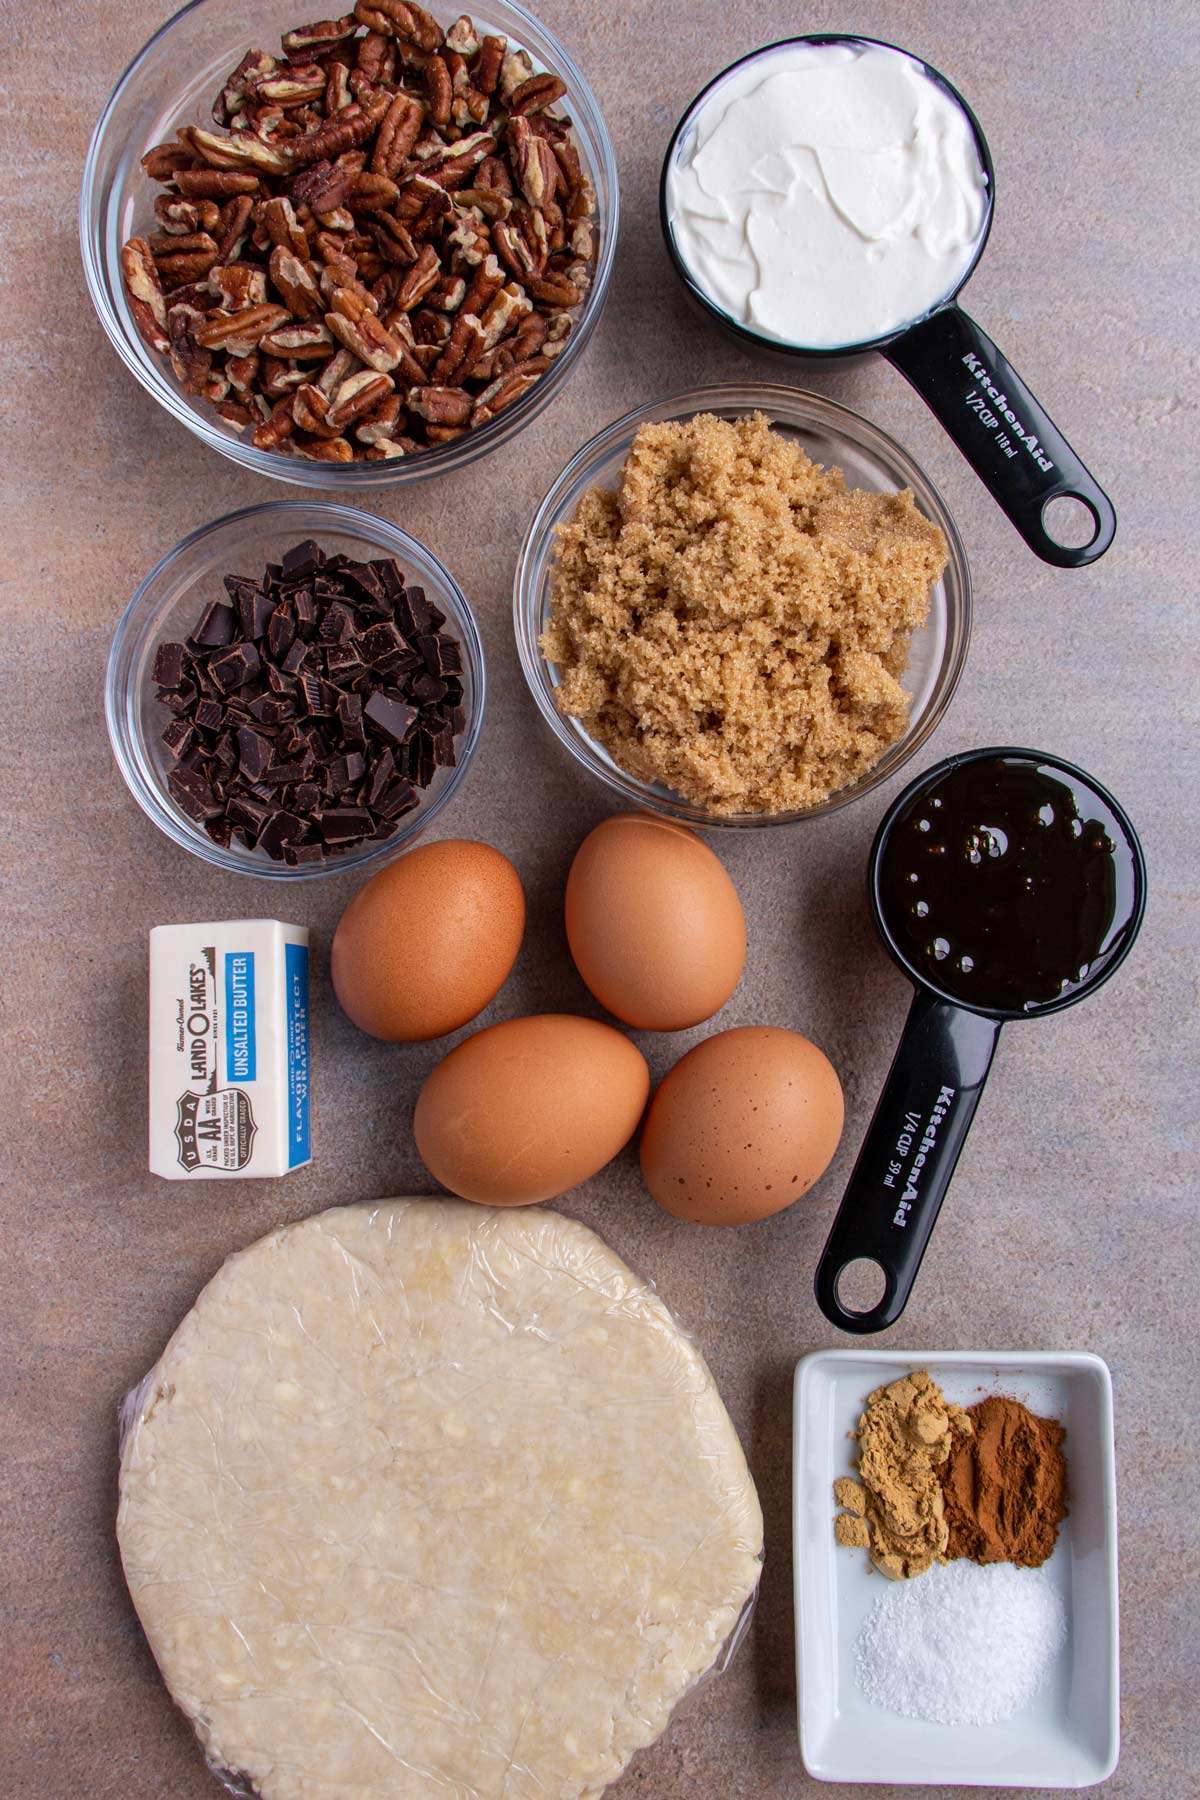 Ingredients for malted chocolate pecan pie on a beige background.